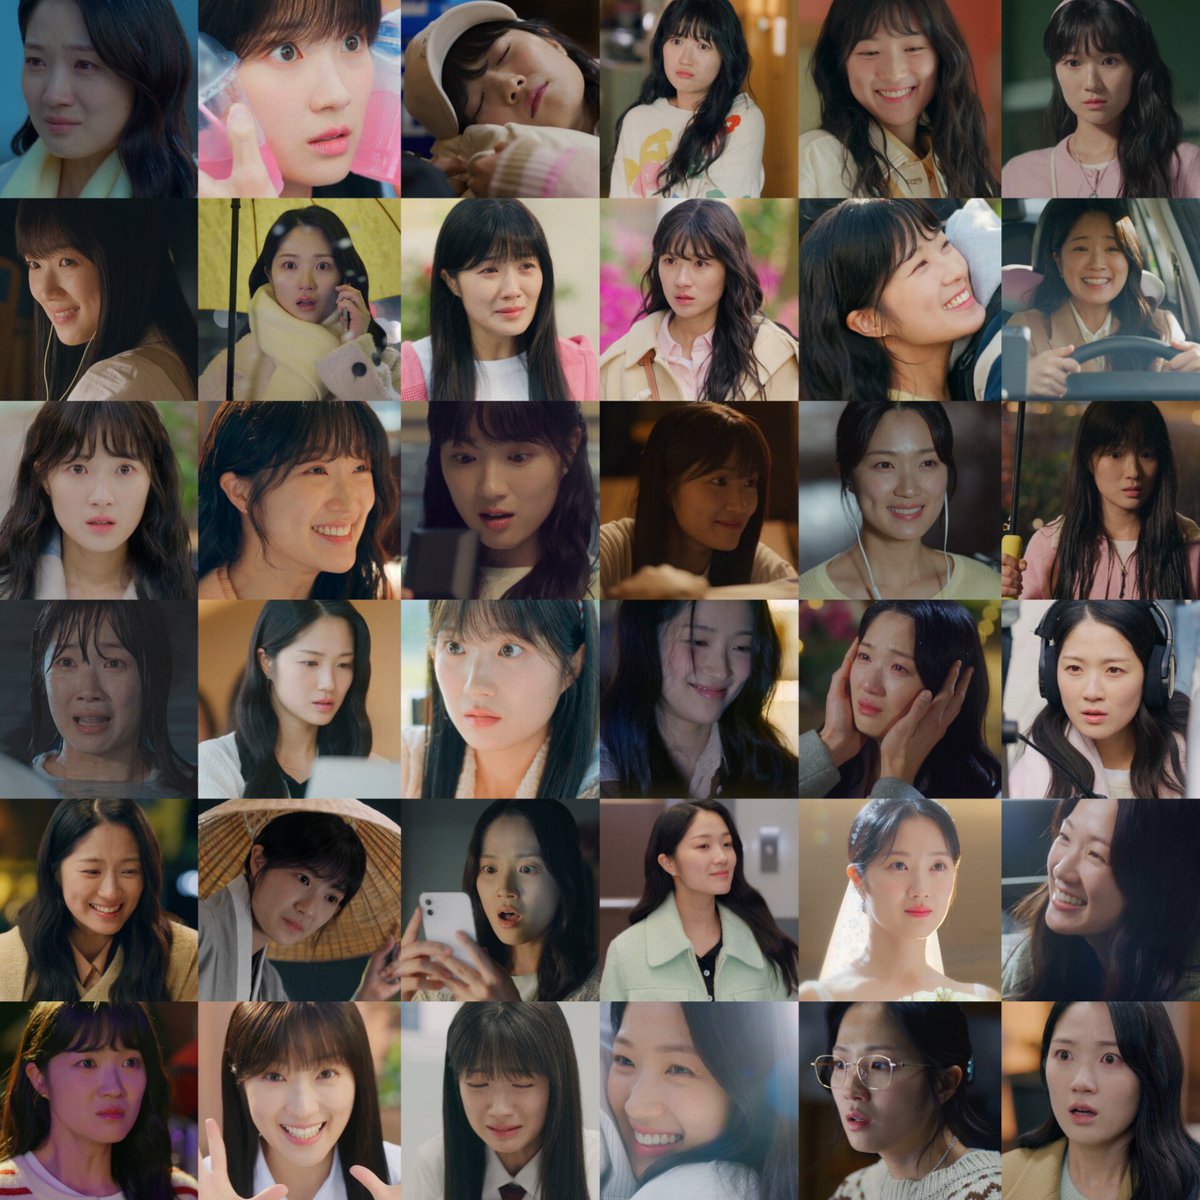 kim hyeyoon showed her wide acting spectrum as im sol in lovely runner, she always delivered top-tier acting performance from the start until the end. the character im sol was really made for her. thank you for being our beloved im sol, kim hyeyoon! you did such an amazing job 💛